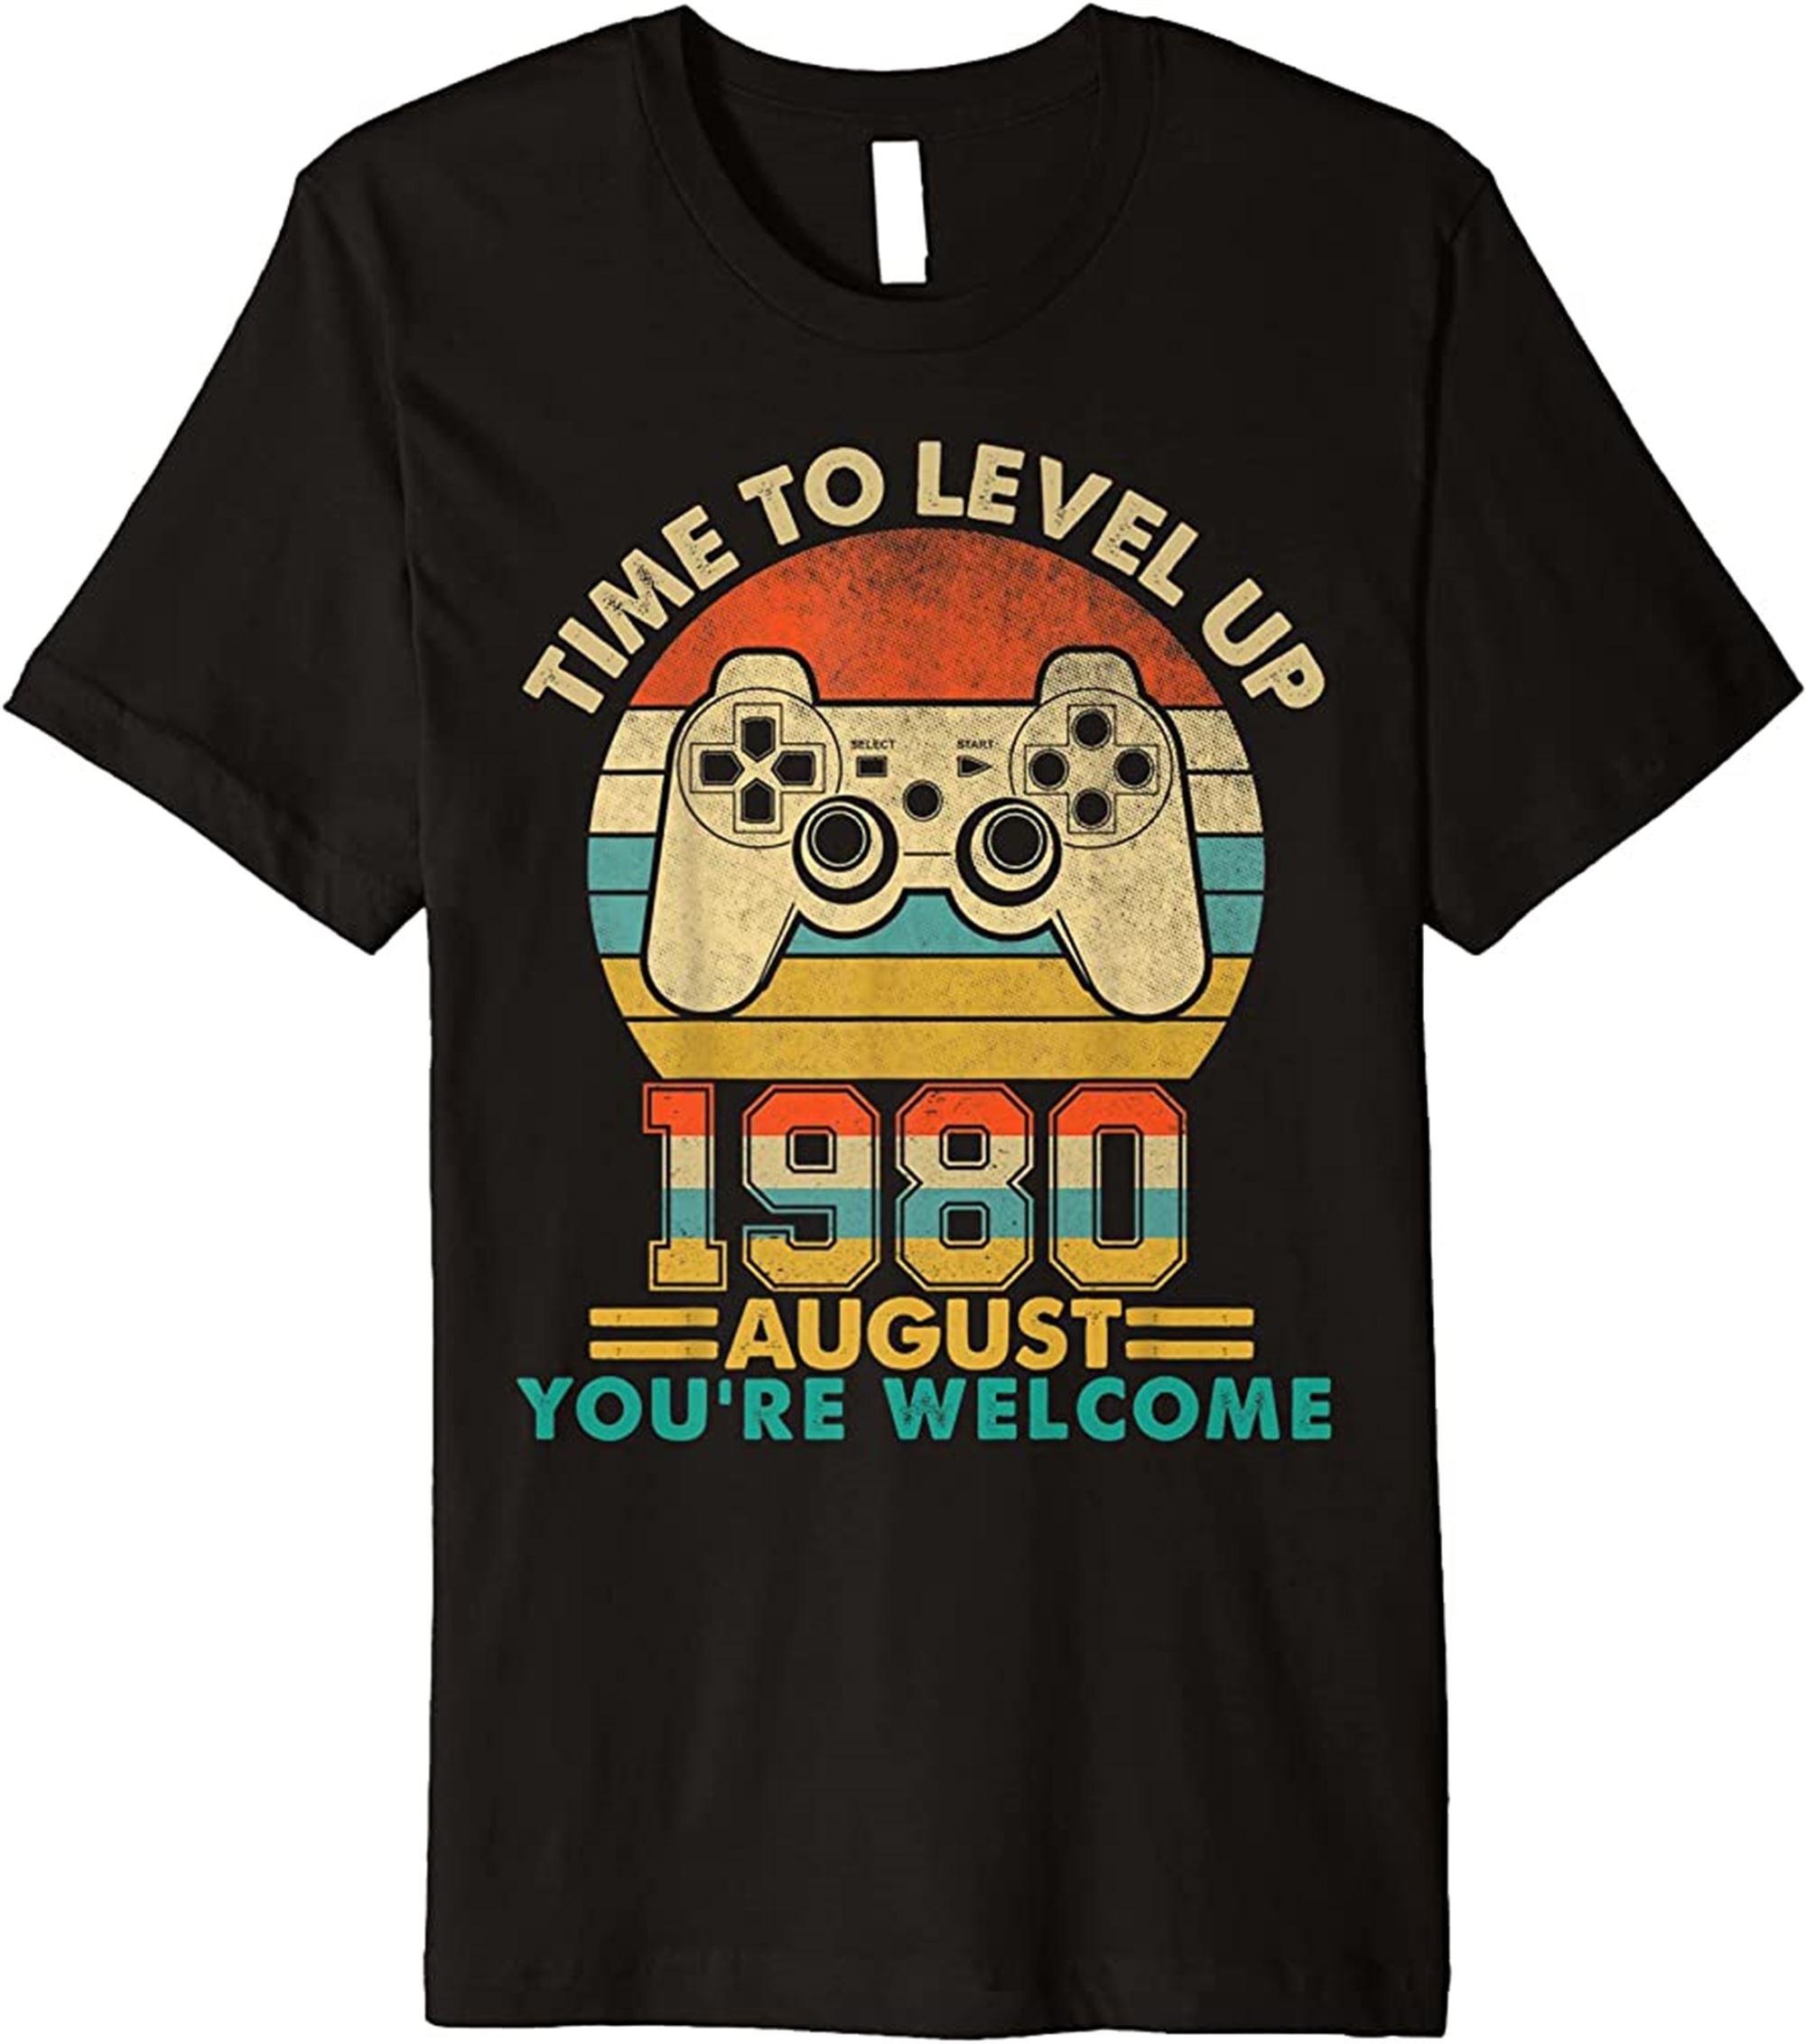 Vintage 1980 August 42 Years Old Video Gamer 42th Birthday Premium T-shirt Full Size Up To 5xl